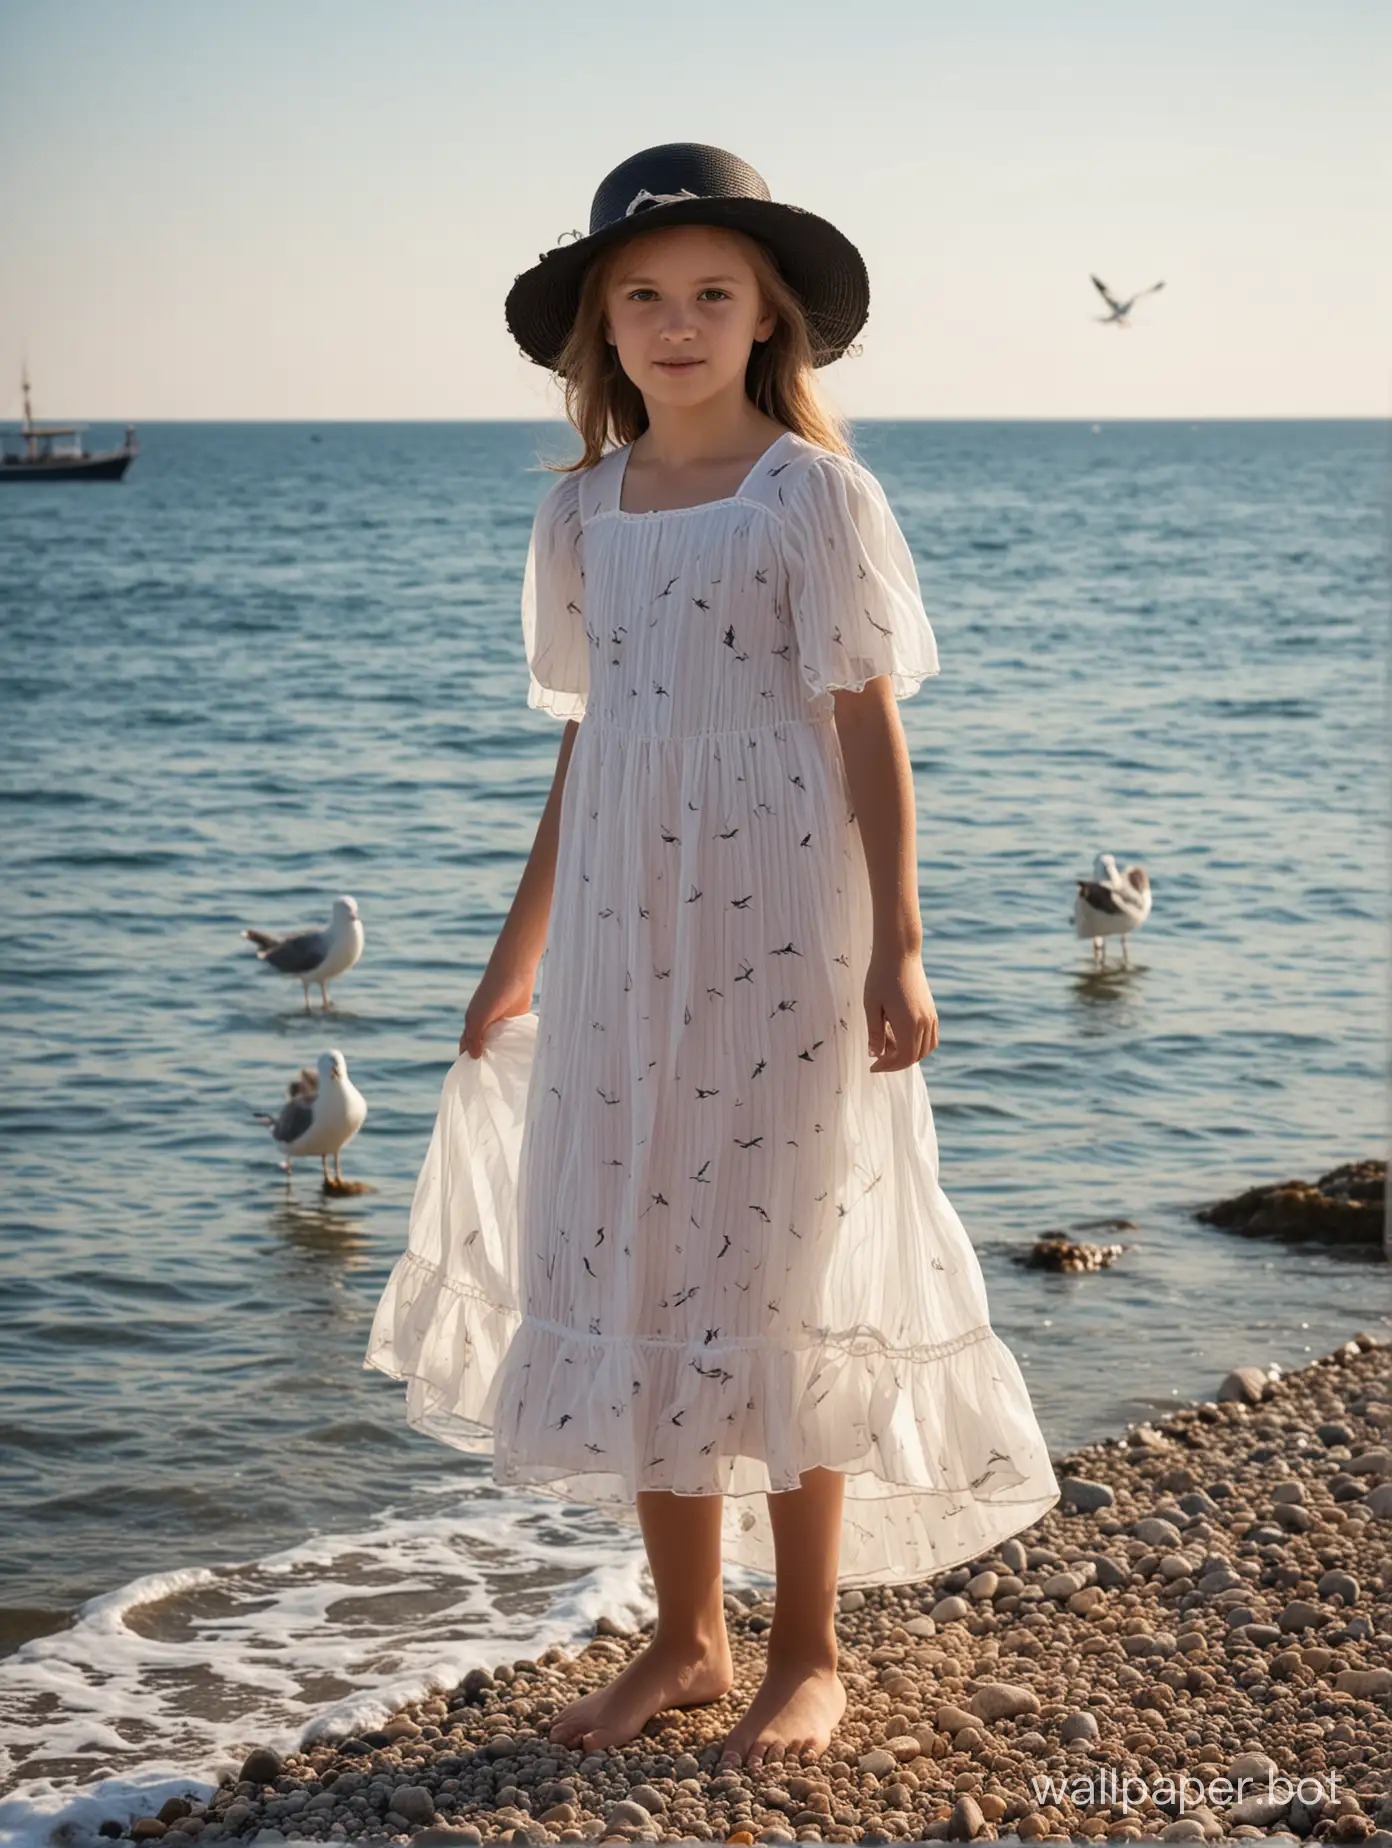 Black Sea, Crimea, 11-year-old girl in a summer dress and hat, full-length, ship in the distance, seagull, transparent dress